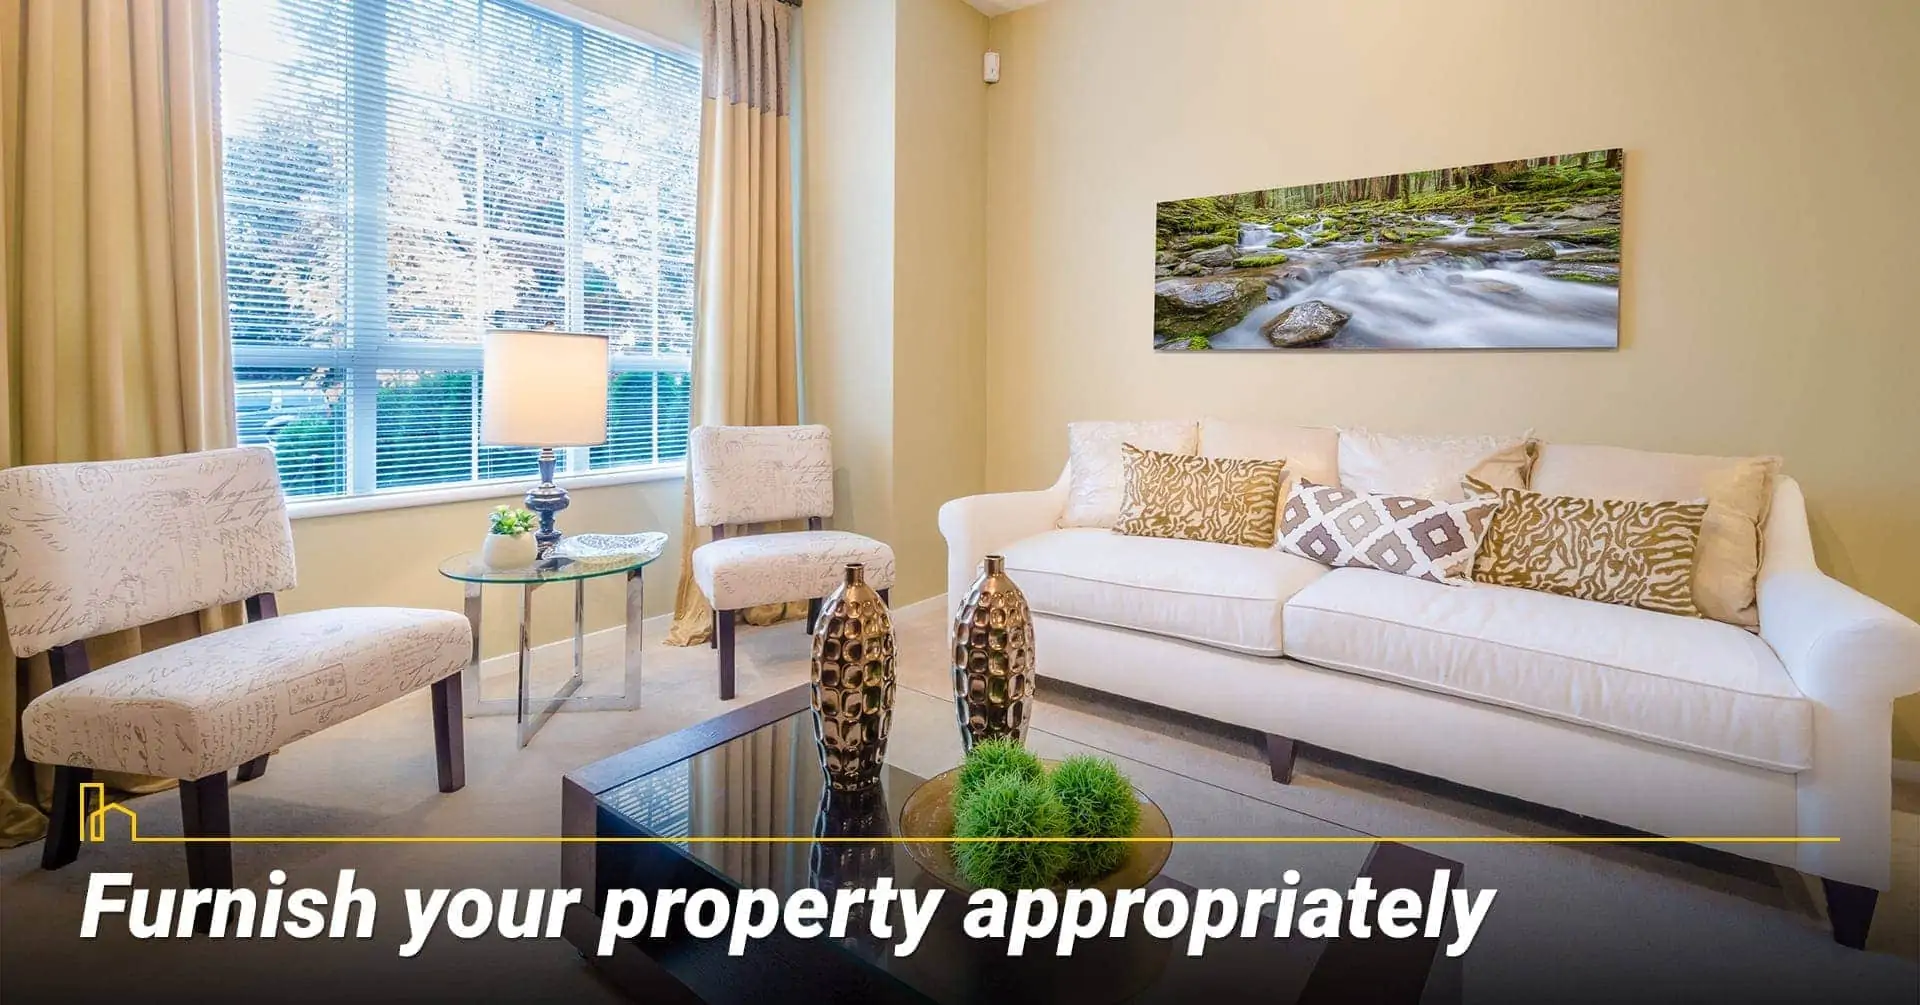 Furnish your property appropriately, decorate your property